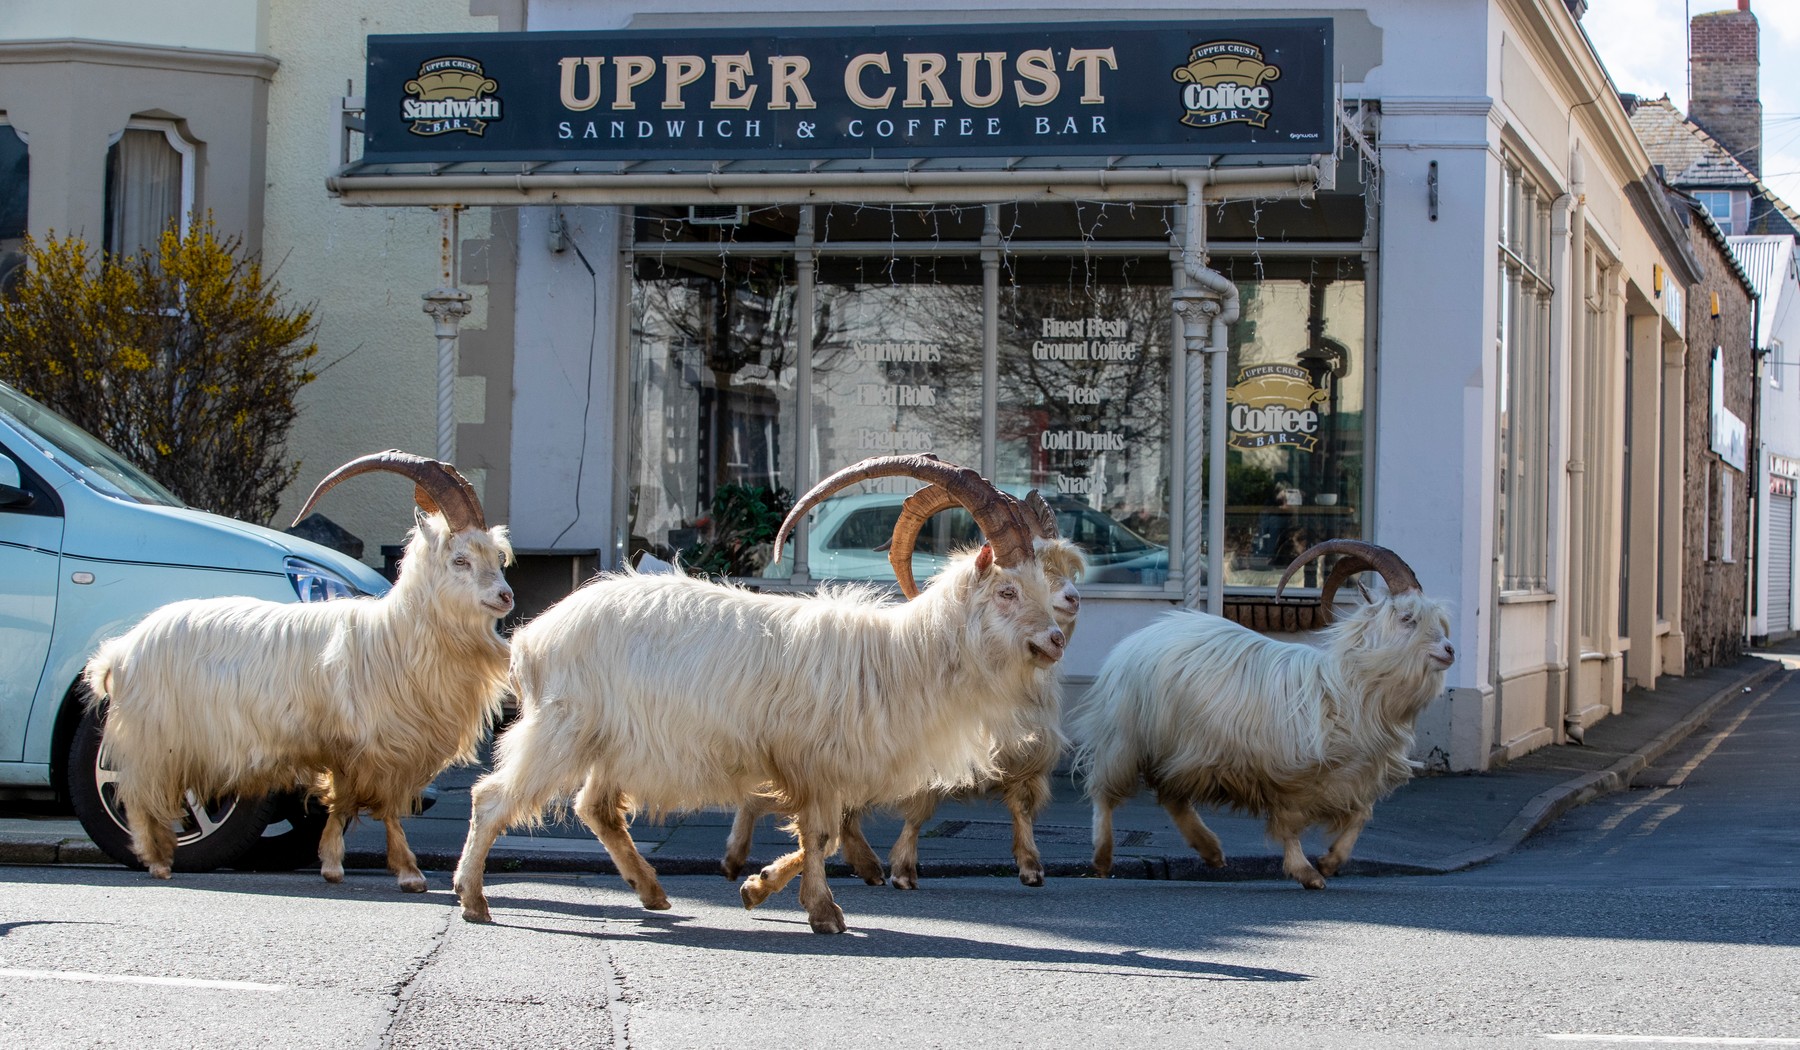 A herd of goats take advantage of quiet streets near Trinity Square, in Llandudno, north Wales. The gang of goats has been spotted strolling around the deserted streets of the seaside town during the nationwide lockdown., Image: 510884192, License: Rights-managed, Restrictions: , Model Release: no, Credit line: Peter Byrne / PA Images / Profimedia